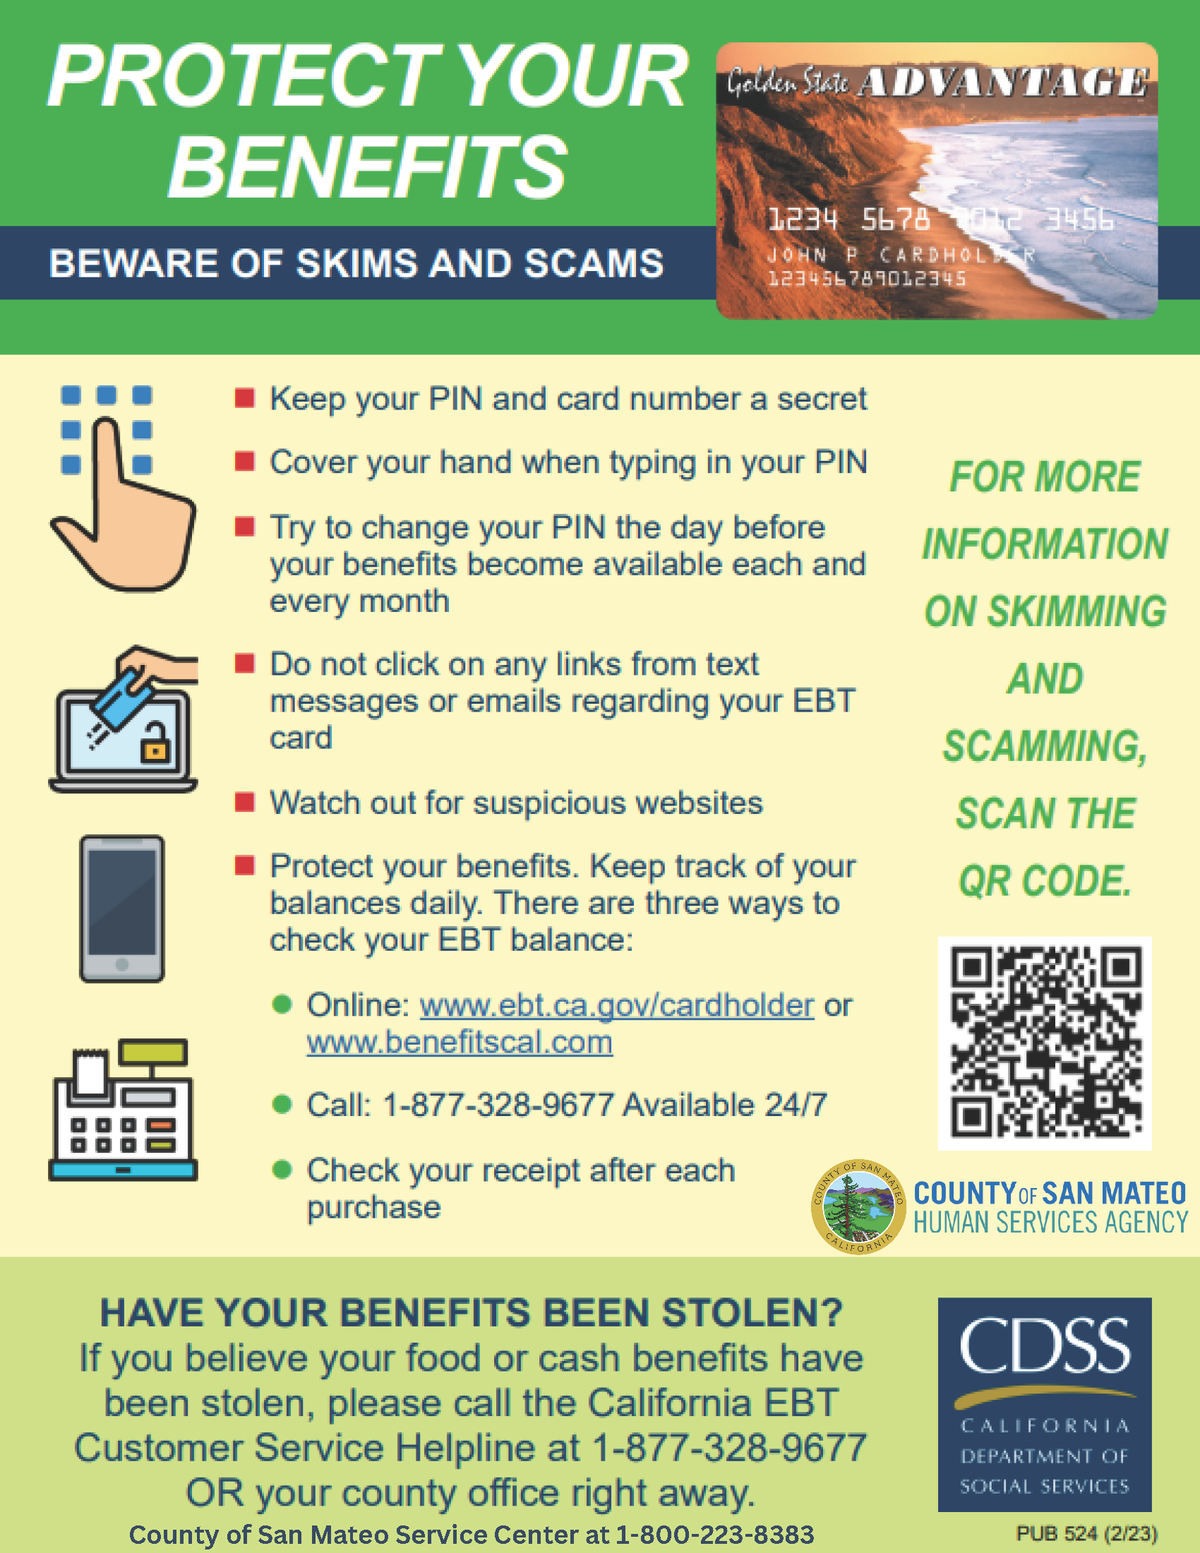 Protect your EBT Benefits from Skims and Scams County of San Mateo, CA